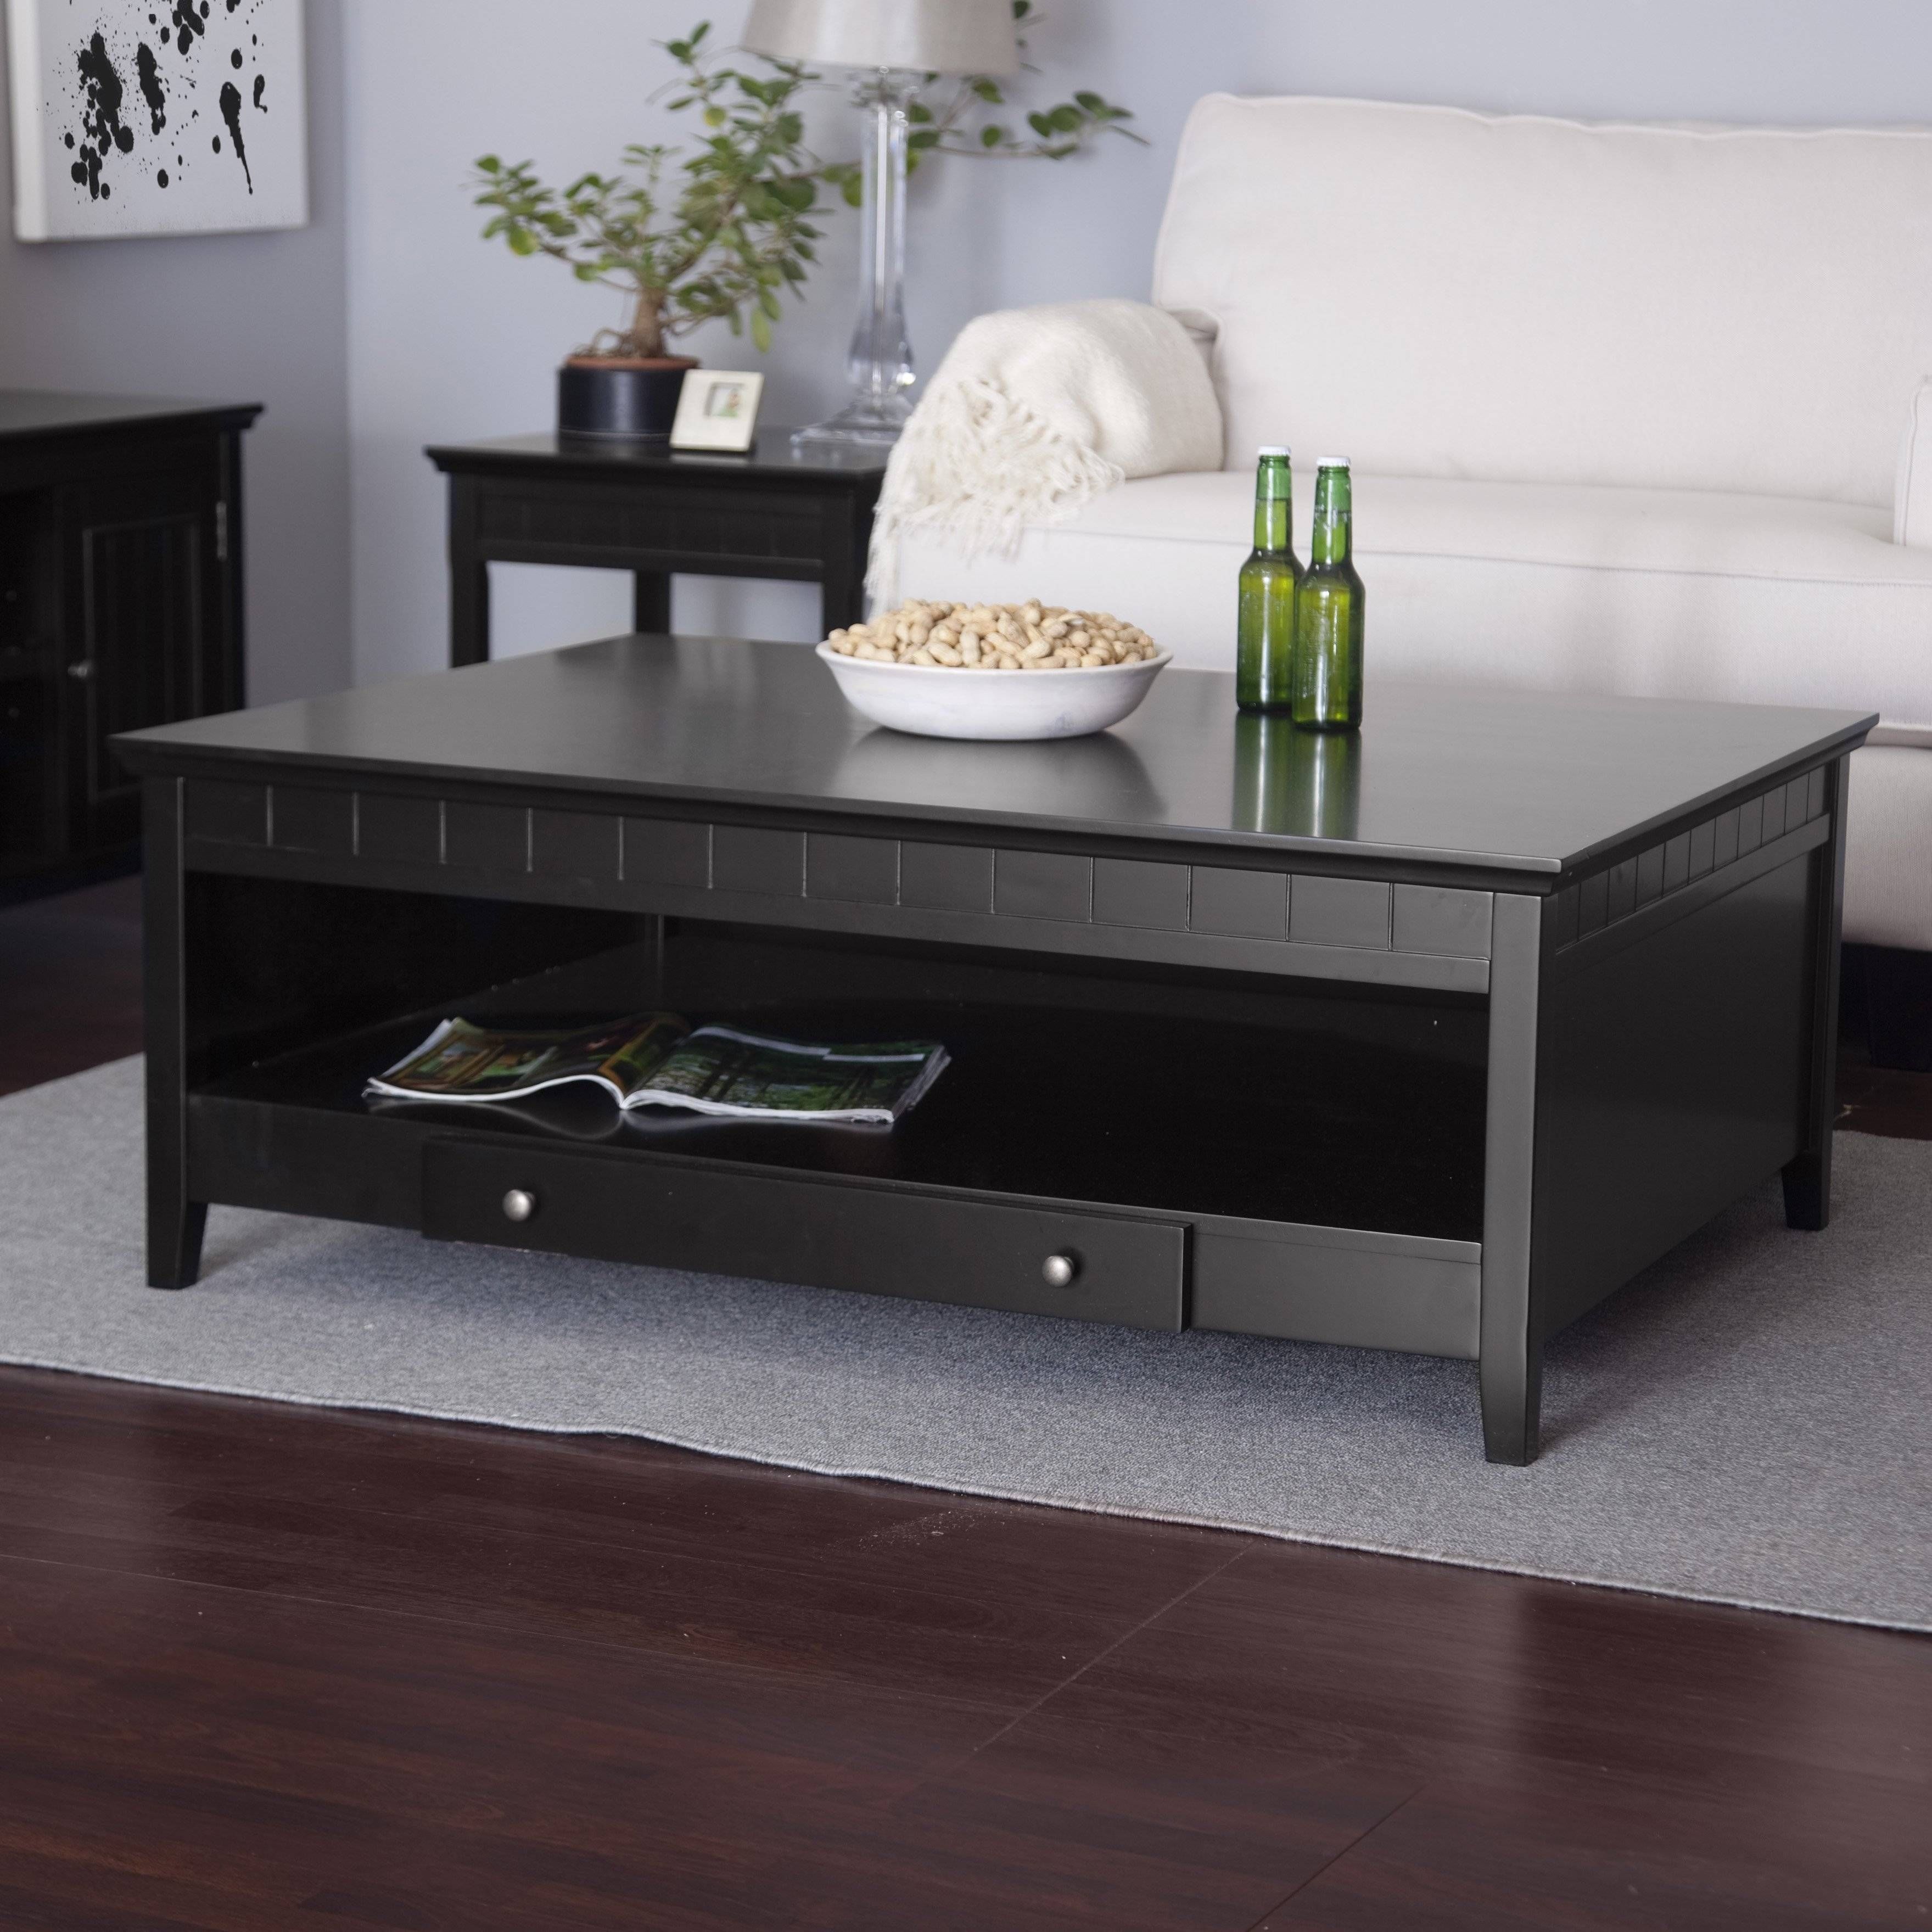 Coffee Table: Brilliant Square Black Coffee Table Designs Square Intended For Square Wood Coffee Tables With Storage (View 21 of 30)